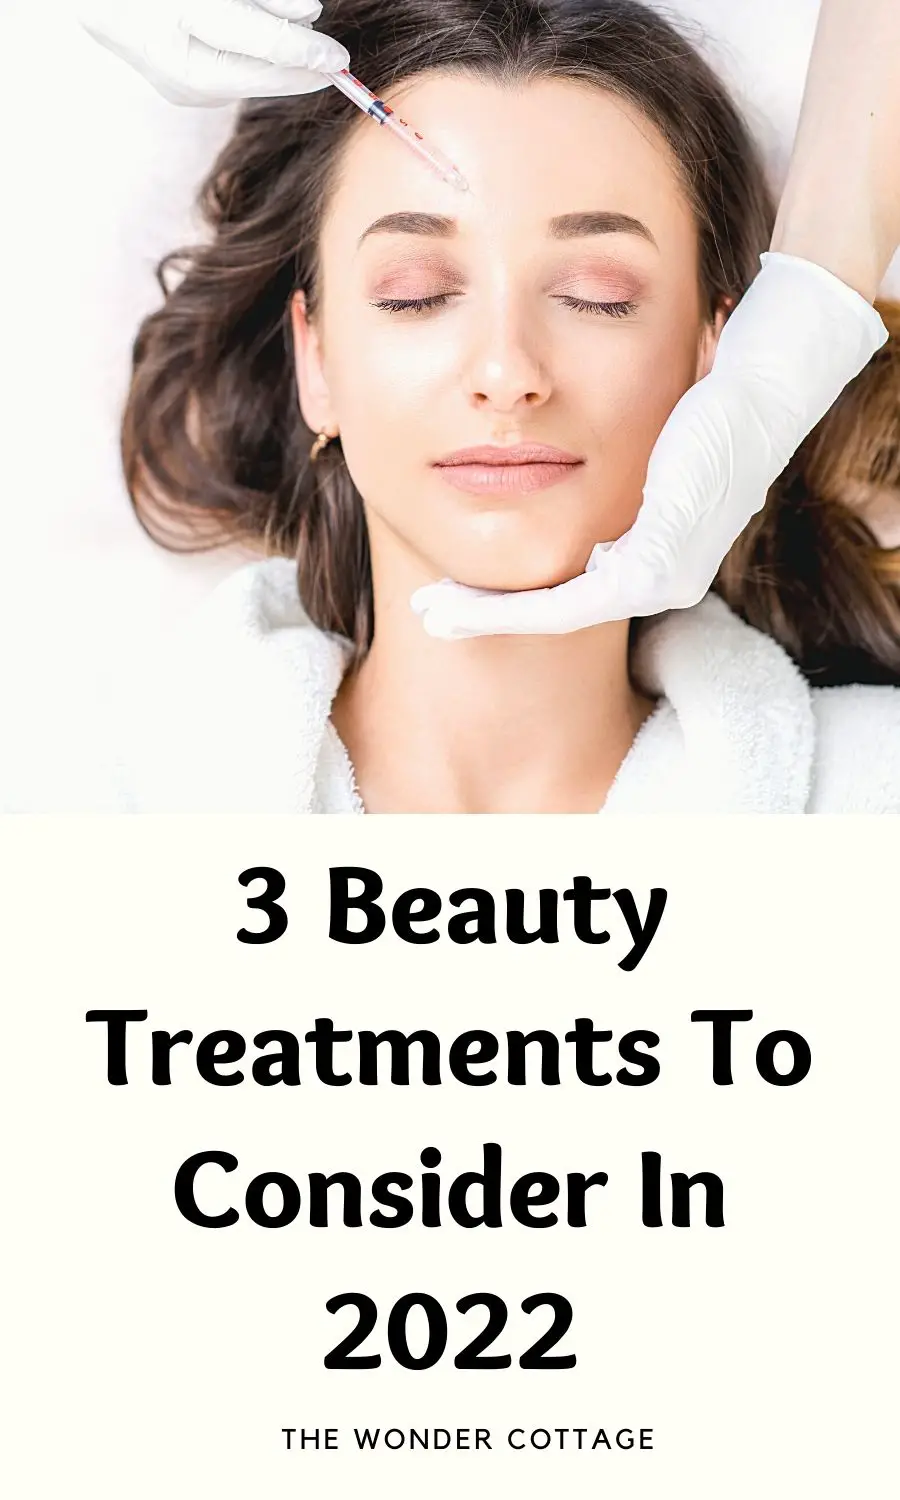 Be More Confident – 3 Beauty Treatments You Should Say Yes To In The New Year